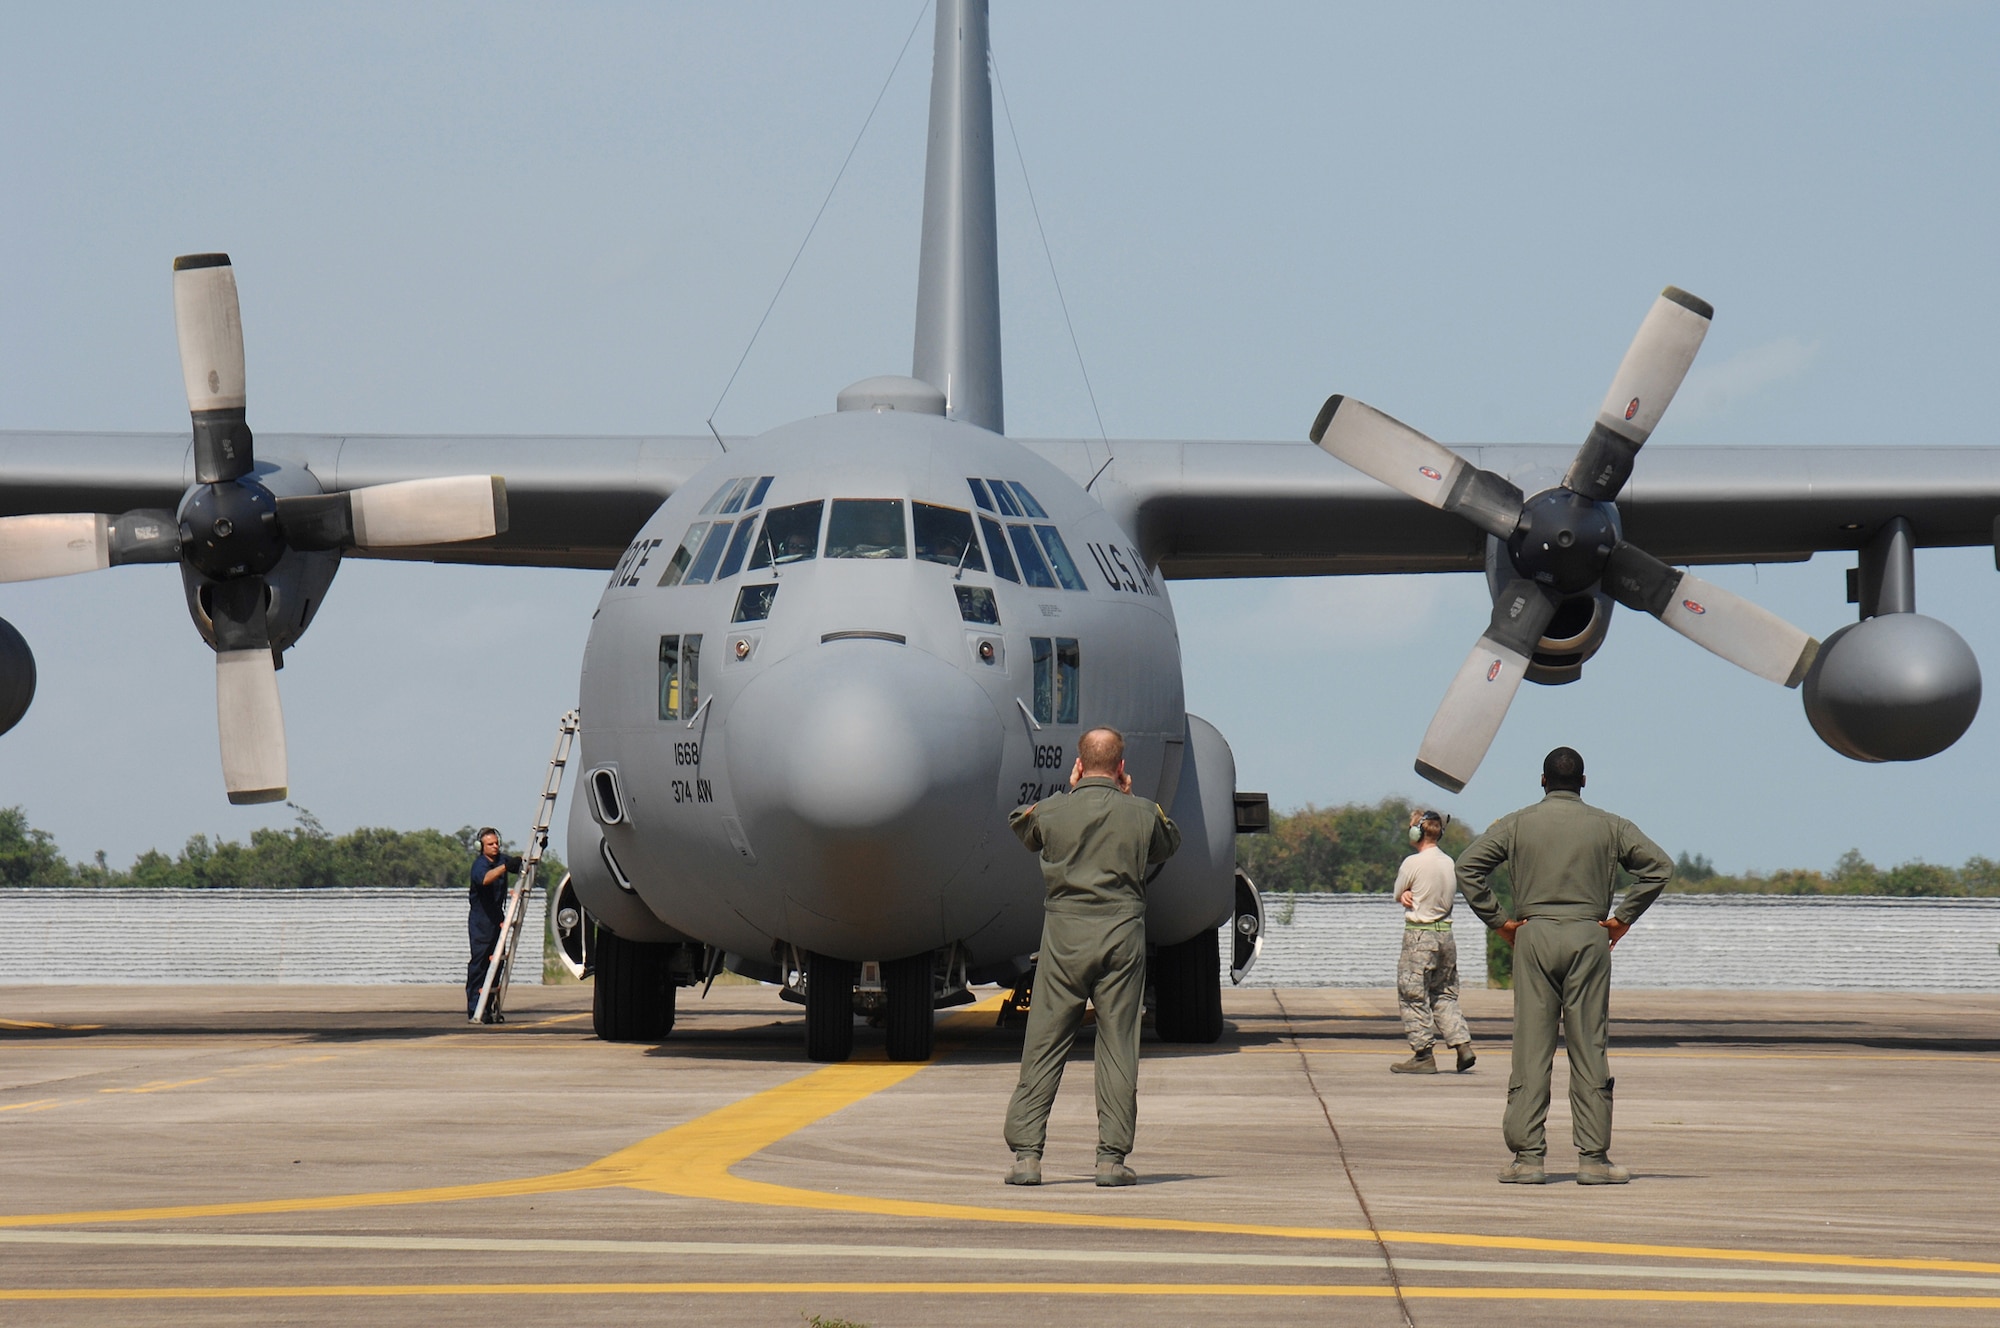 UTAPAO, Thailand - Airmen from Yokota Air Base, Japan prepare to service a C-130 Hercules after its delivery of U.S. humanitarian relief supplies to the people of Burma May 14. The Airmen are deployed in support of Operation Caring Response. (USAF photo by Senior Airman Sonya Croston)